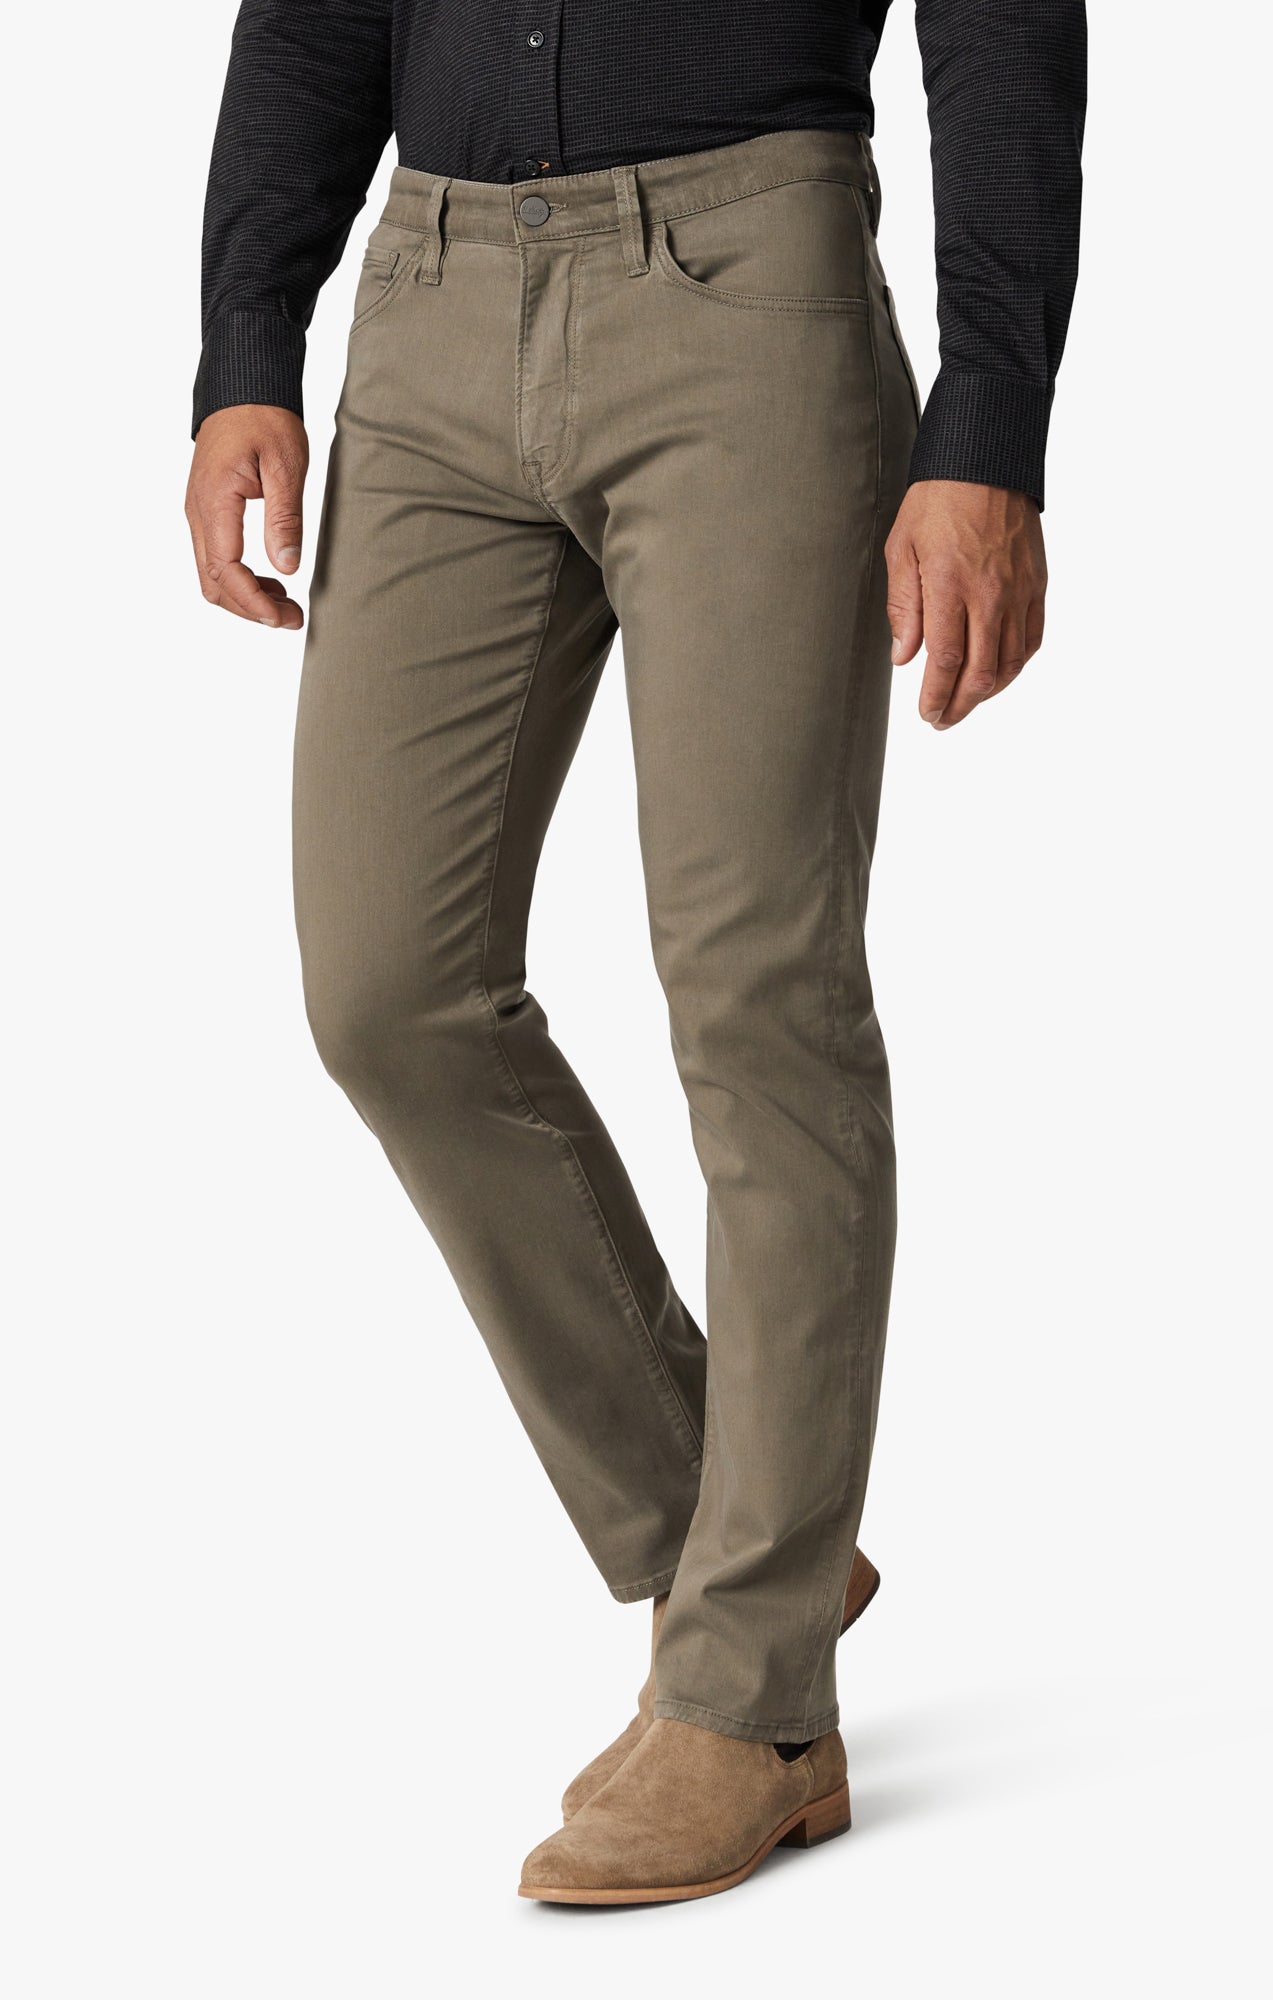 Courage Straight Leg Pants in Canteen Twill – 34 Heritage